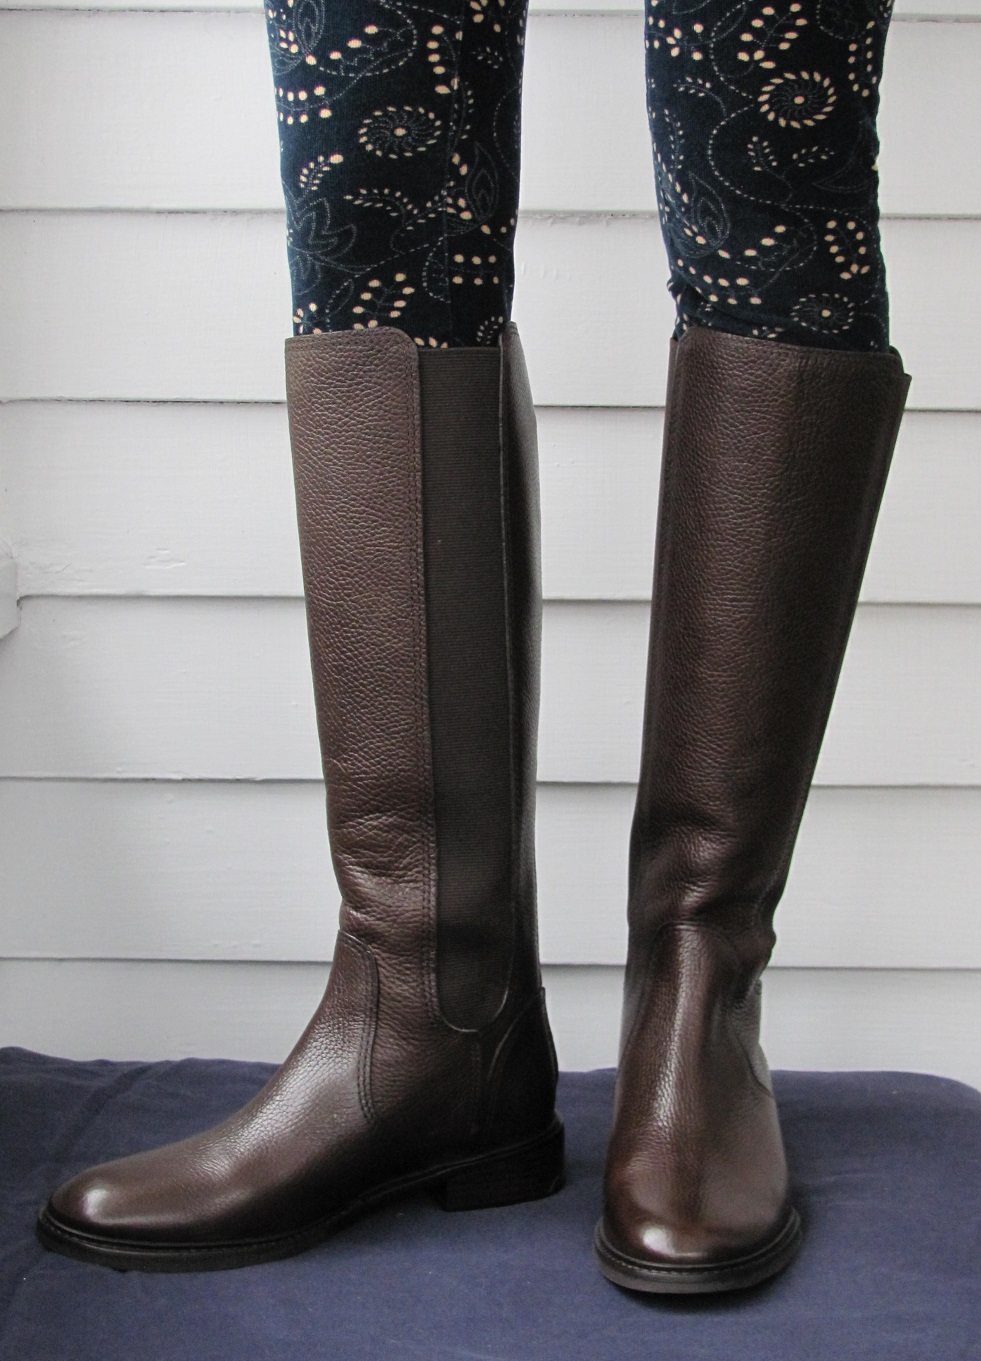 Howdy Slim! Riding Boots for Thin Calves: Going Going...Gone?